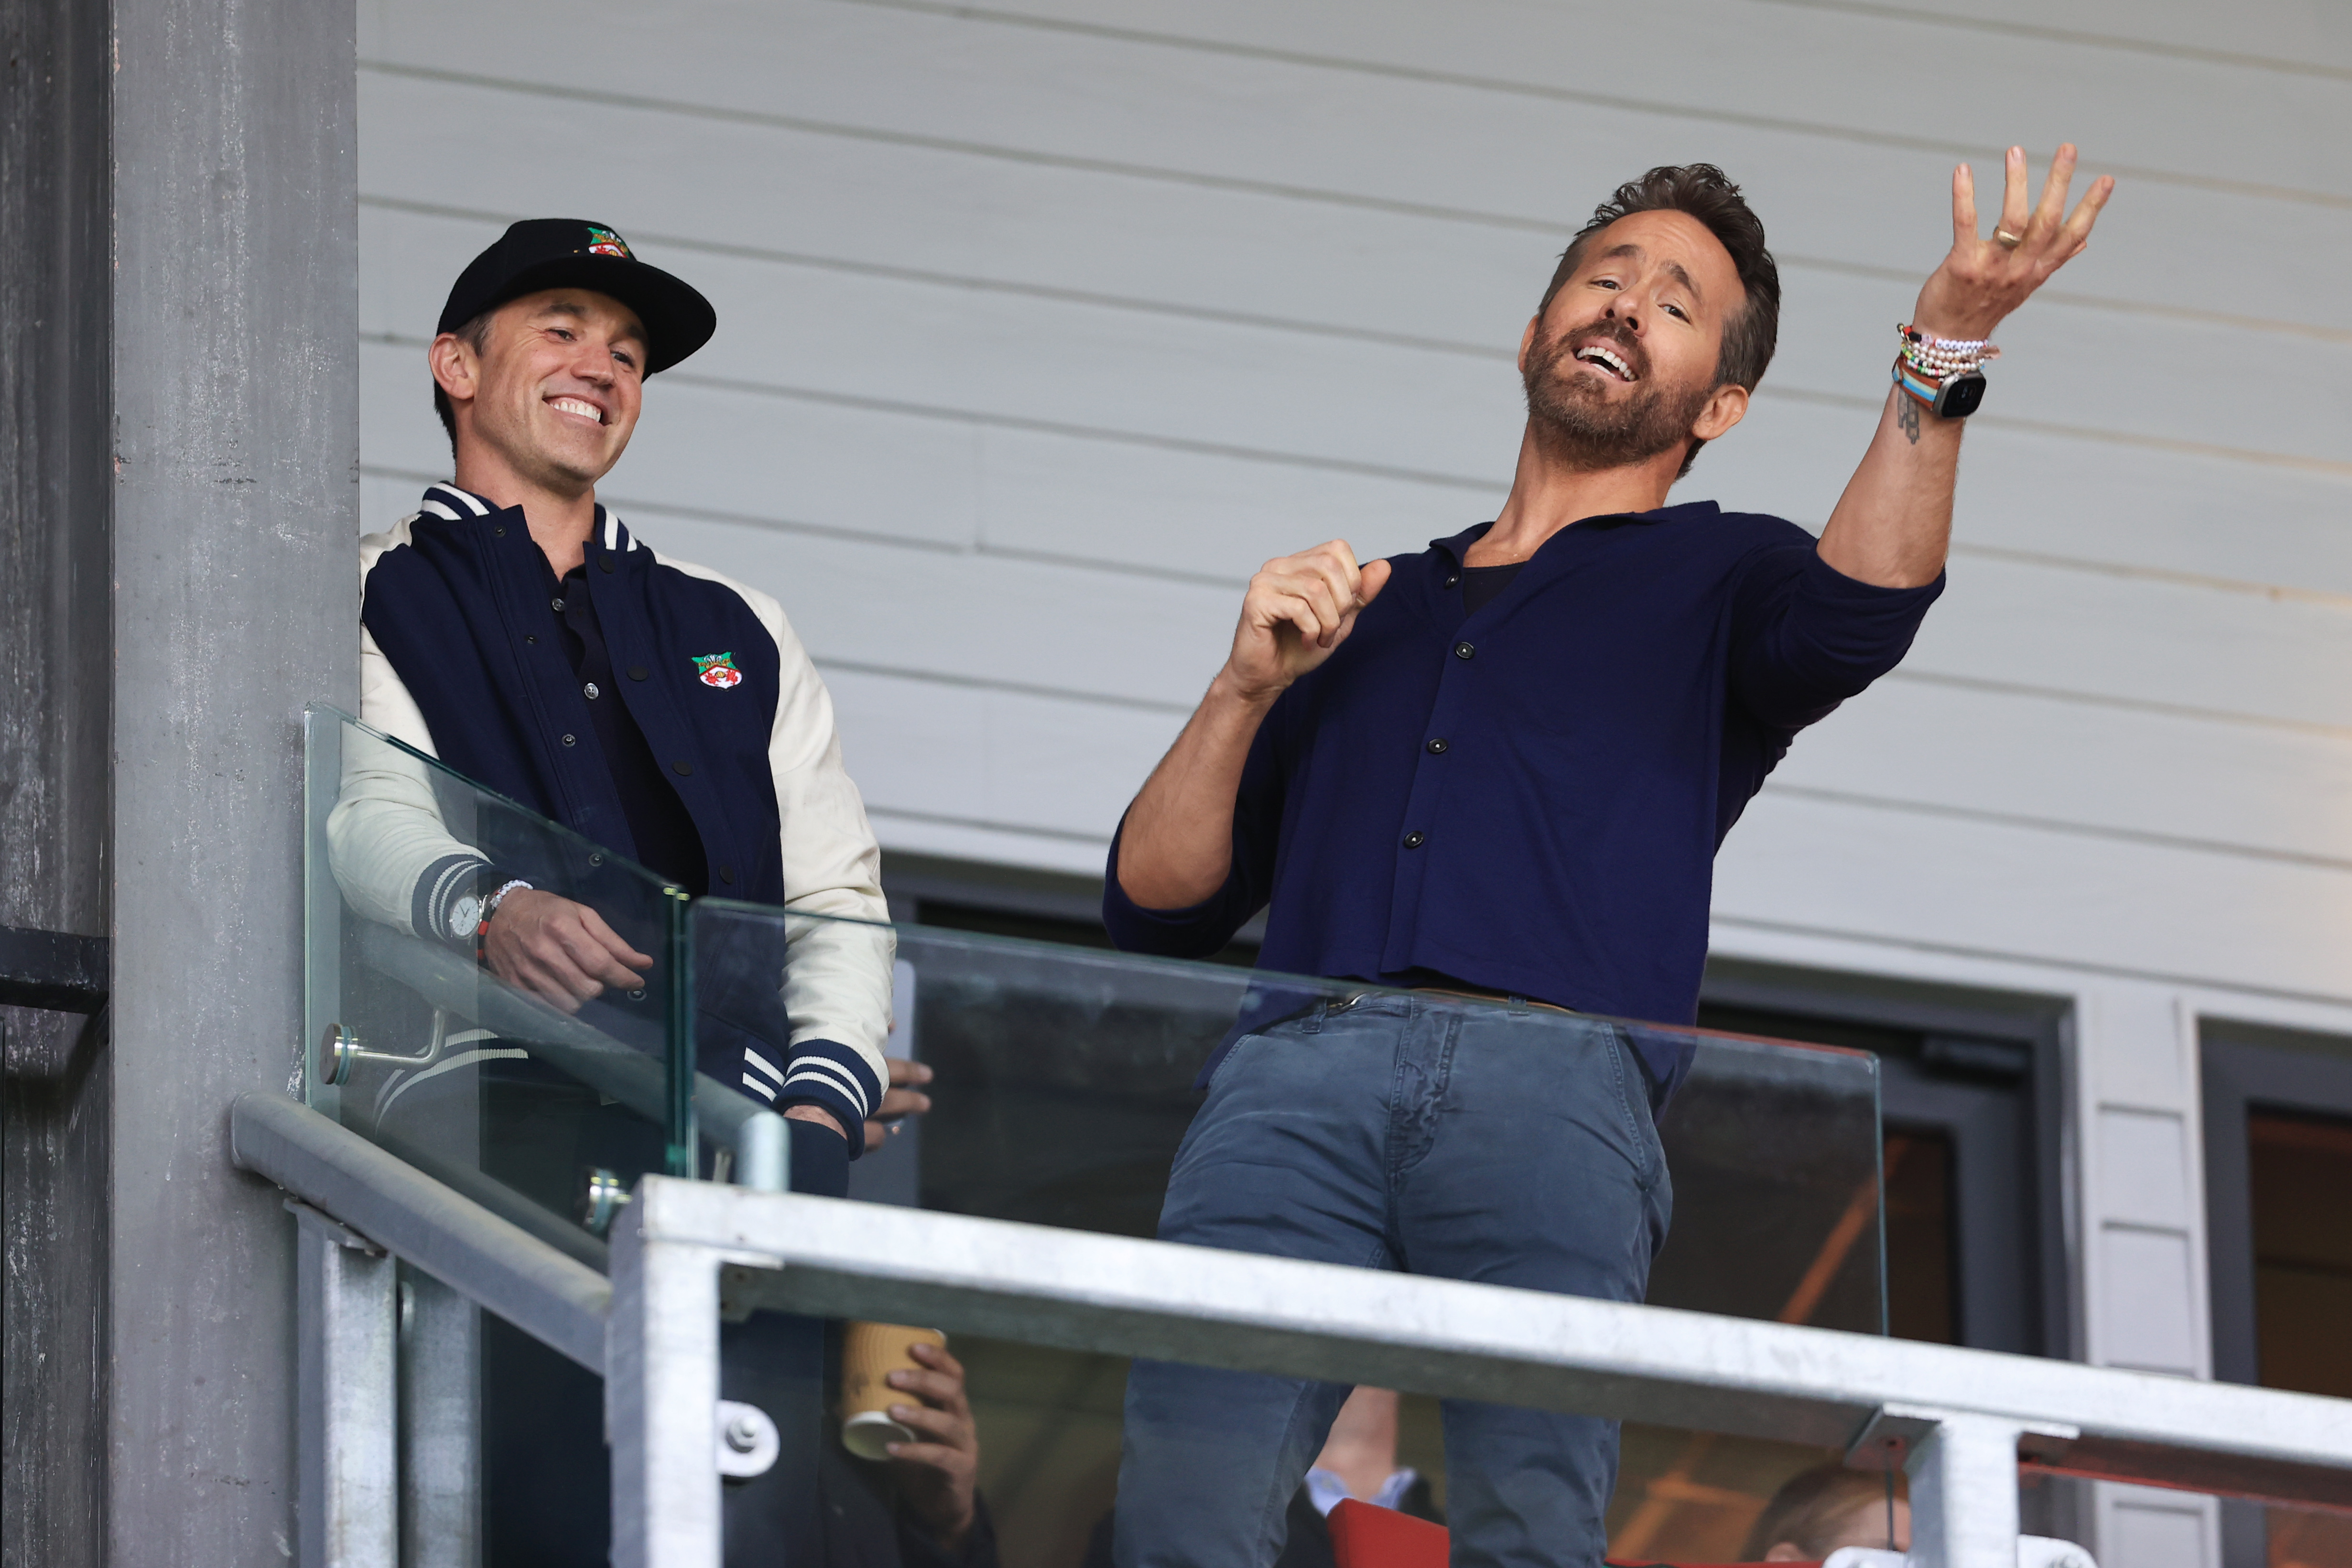 Ryan Reynolds' latest prank on Rob McElhenney involves the Titanic and
that steamy drawing